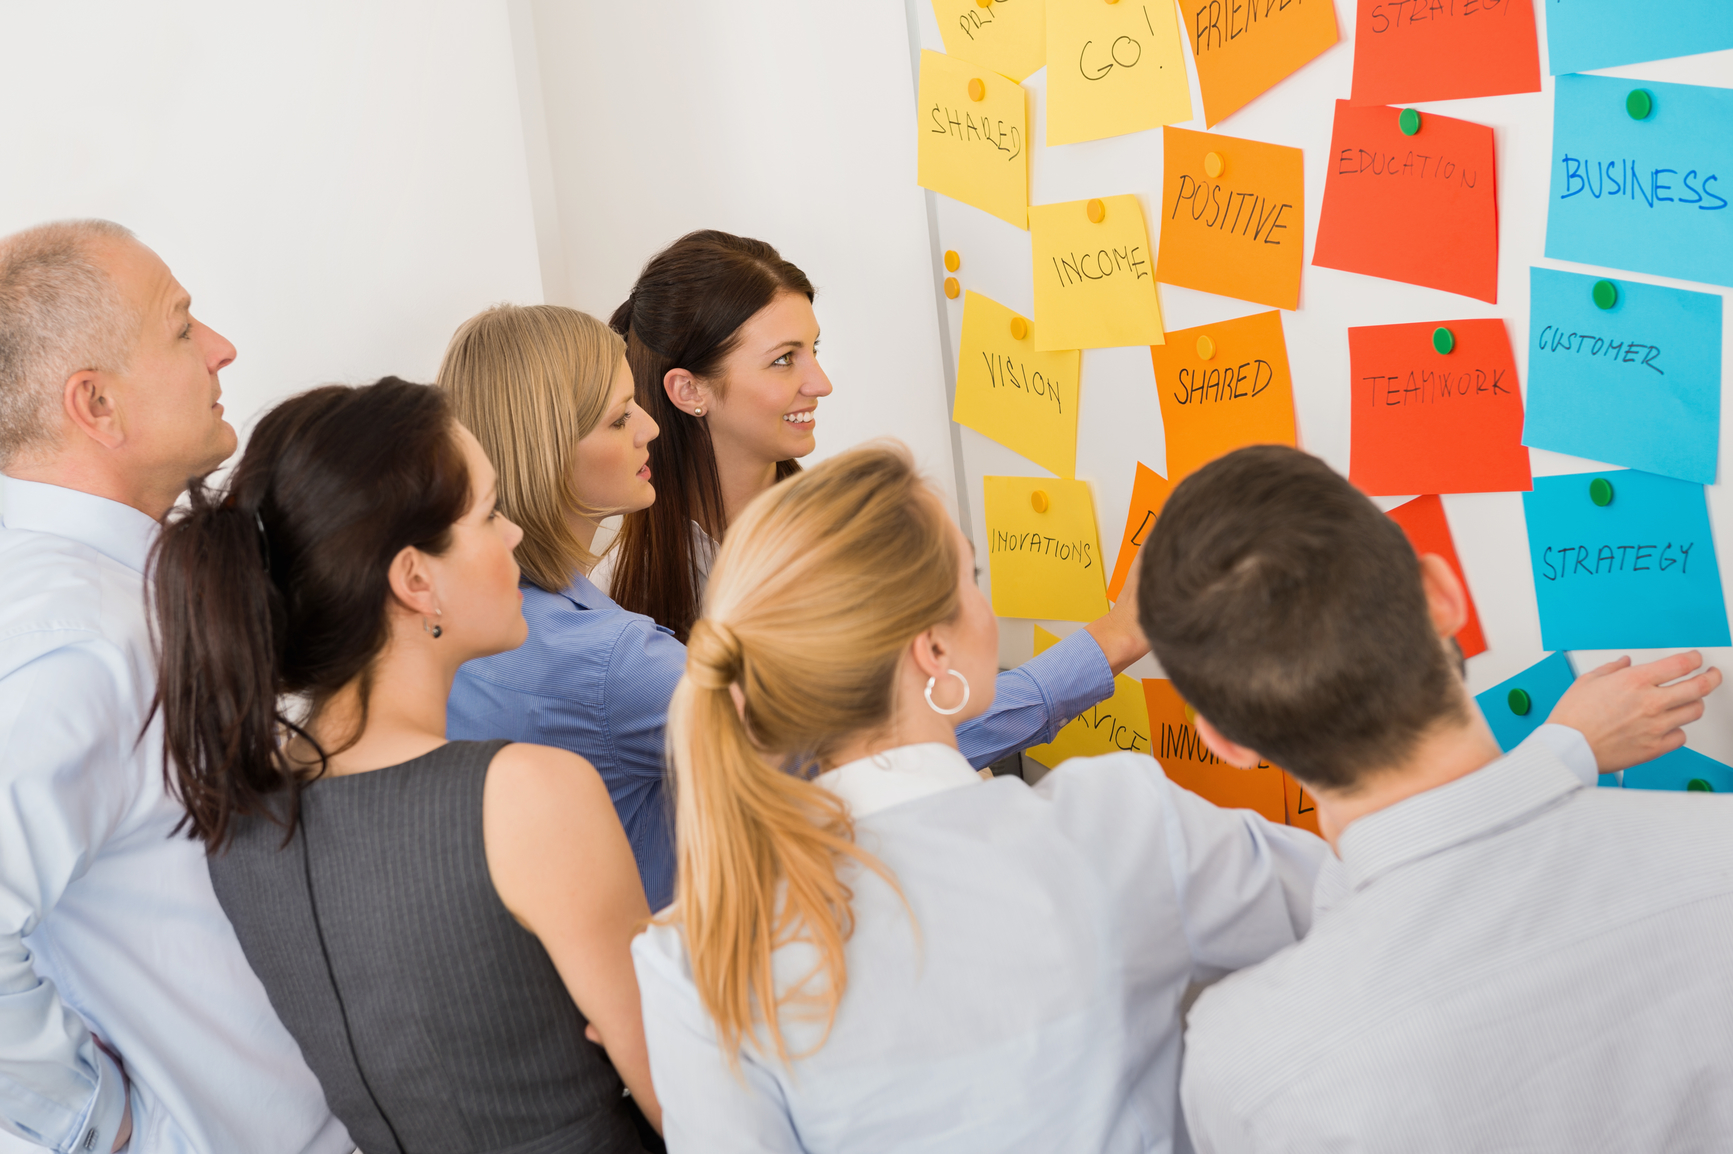  A group of people are brainstorming ideas in a meeting and writing them on sticky notes that they are attaching to a whiteboard.